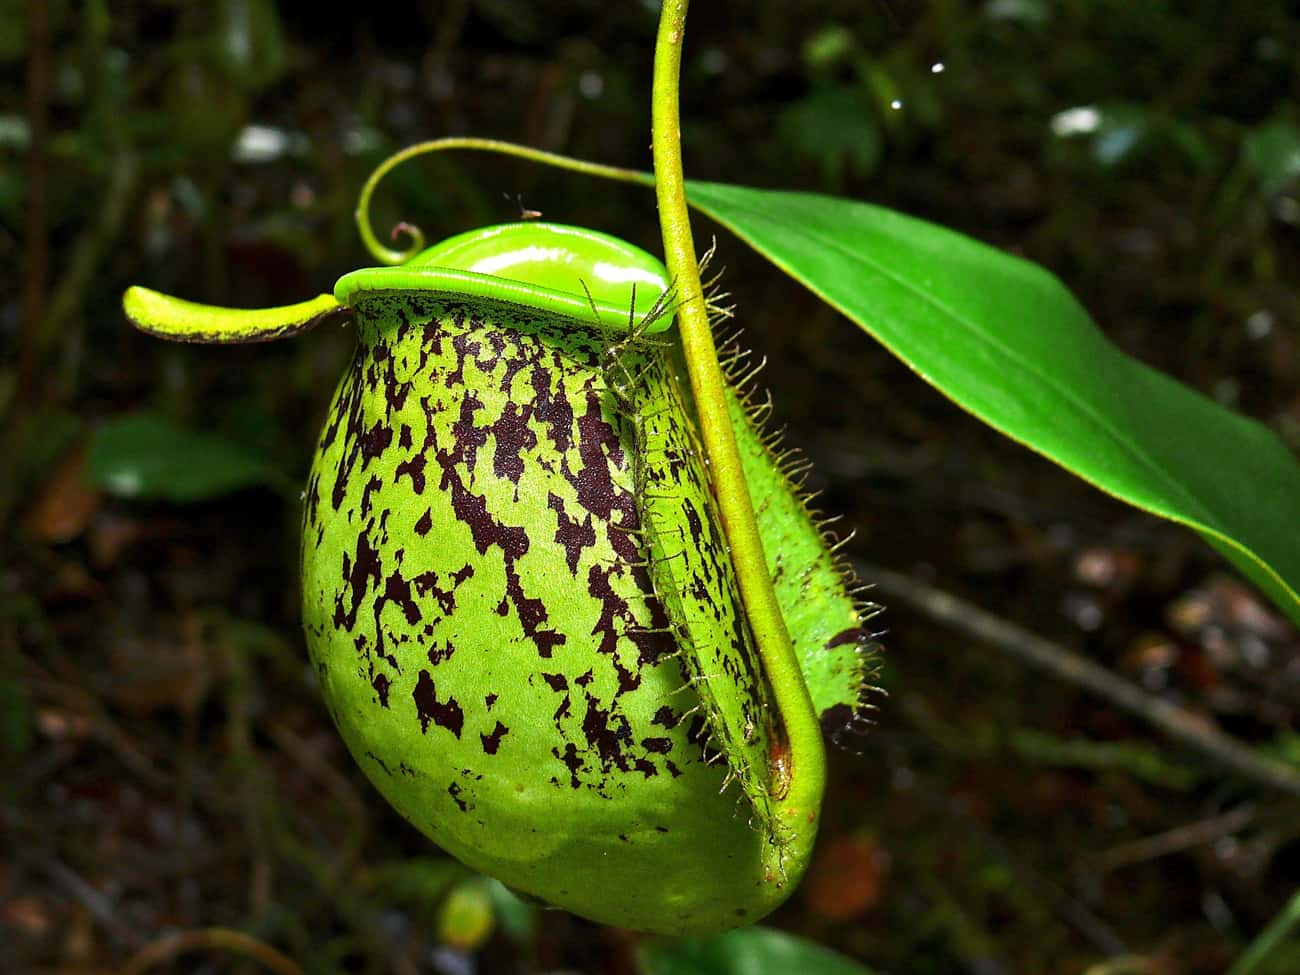 The Pitcher Plant Doesn’t Need To Do Anything To Catch Its Prey